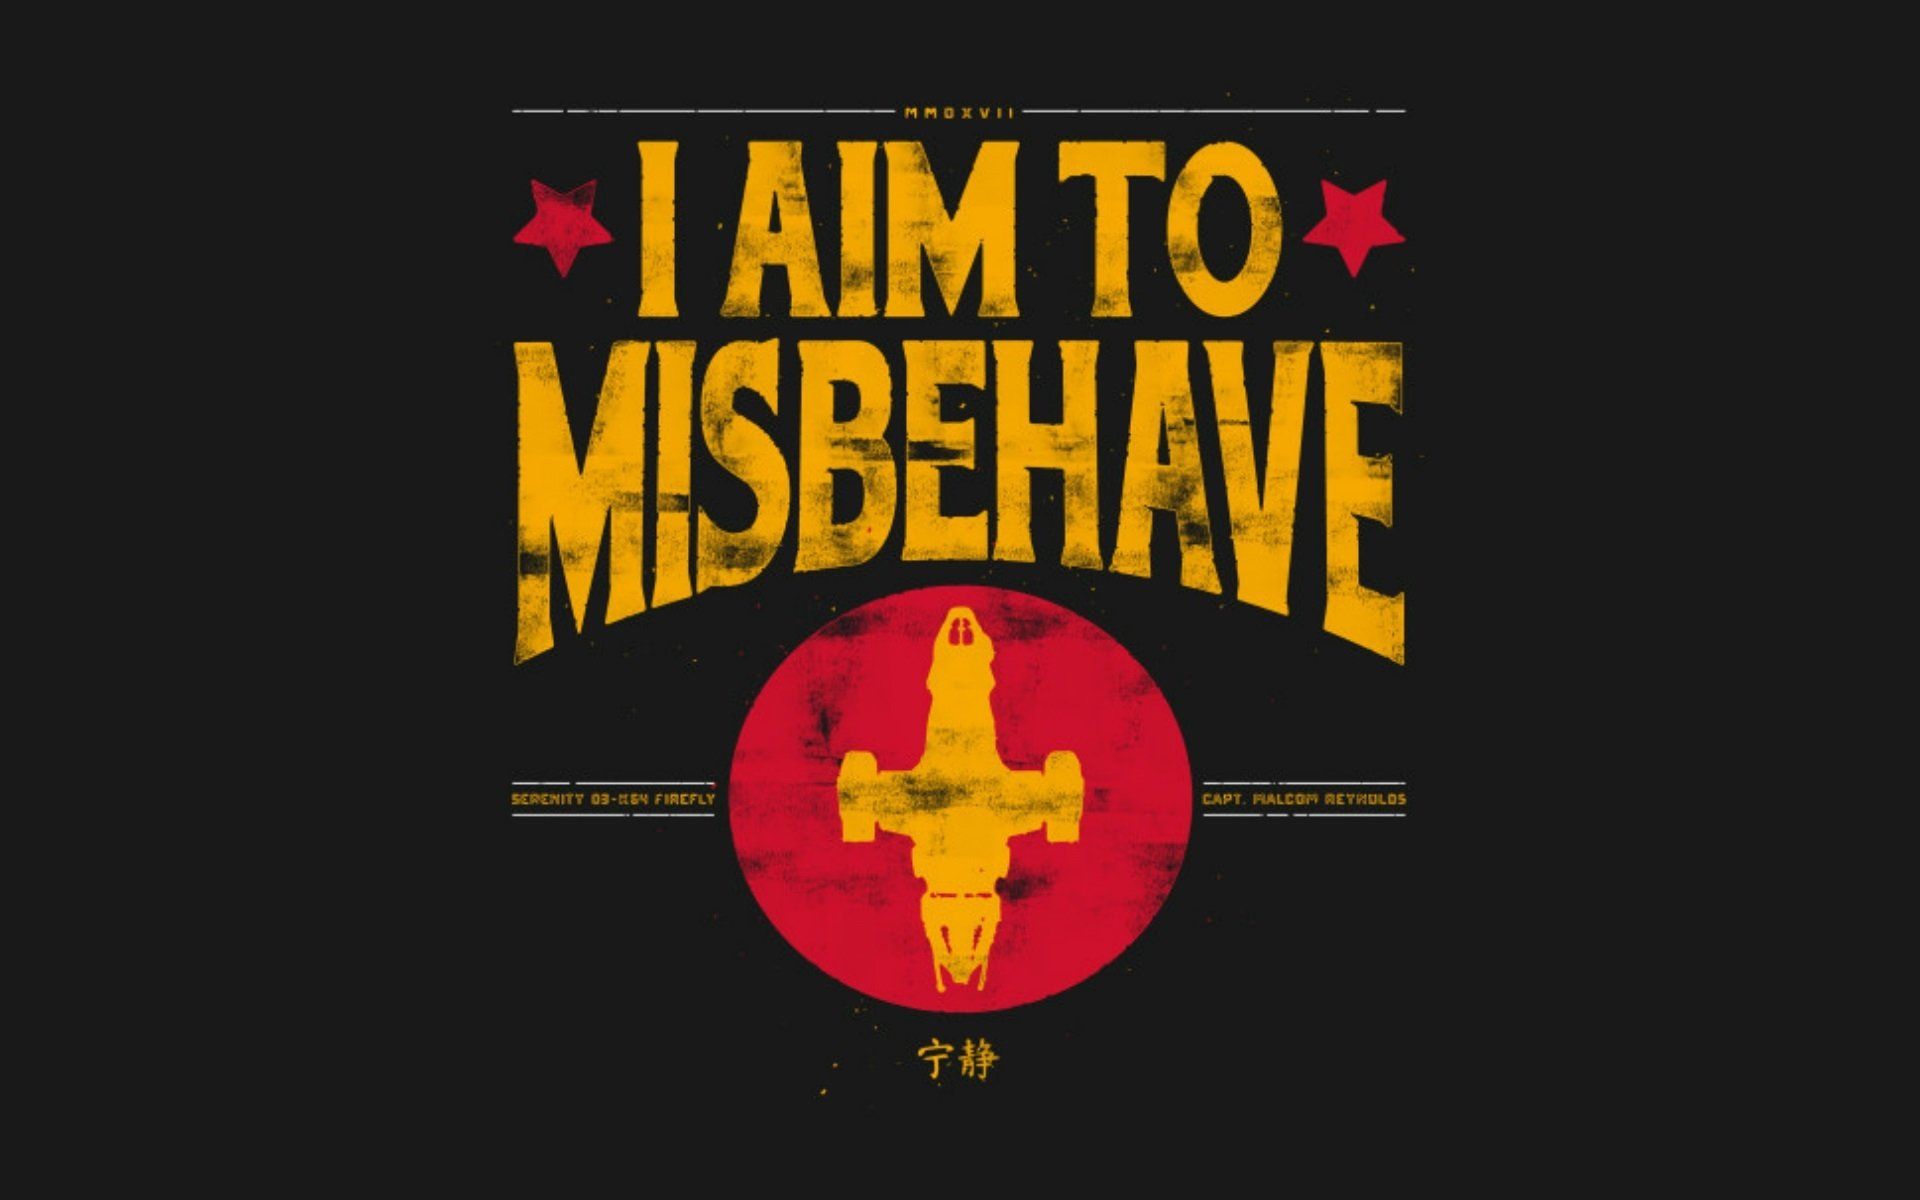 I aim to misbehave HD Wallpaper. Background Imagex1200